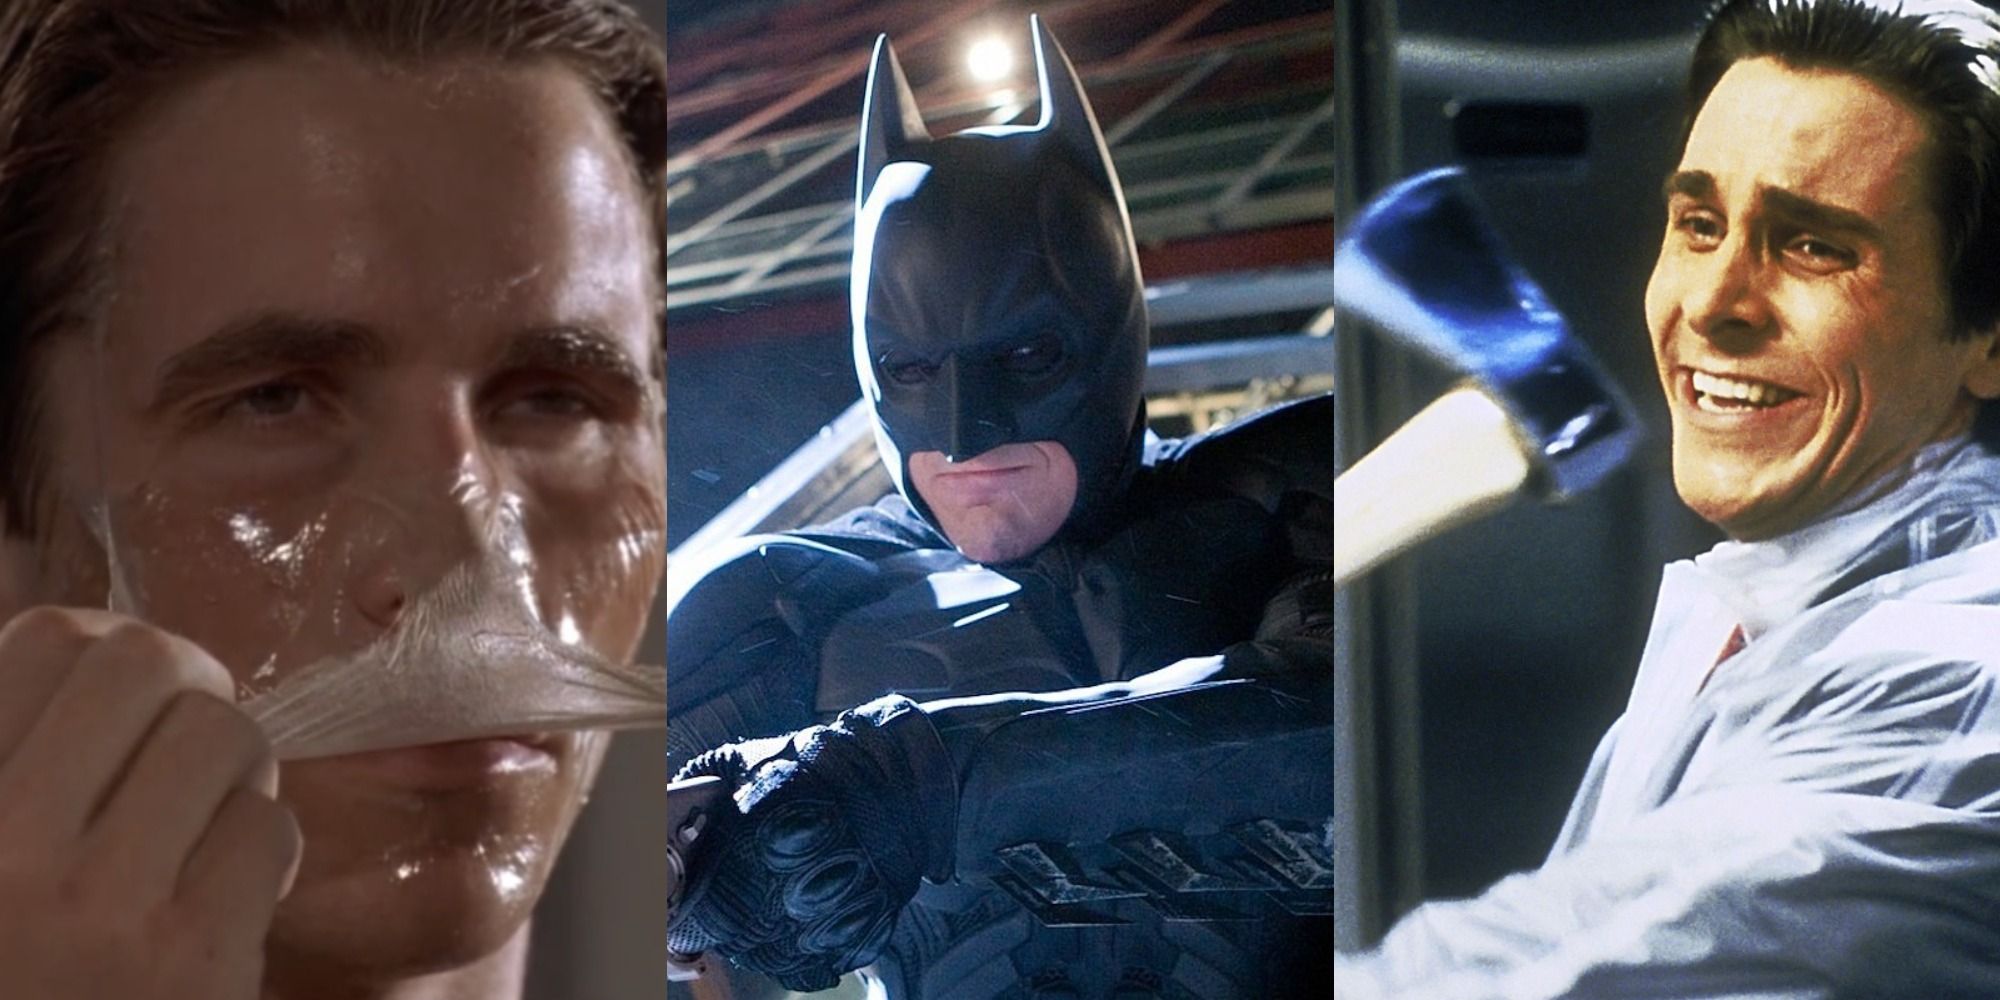 Christian Bale in American Psycho, The Dark Knight, and American Psycho